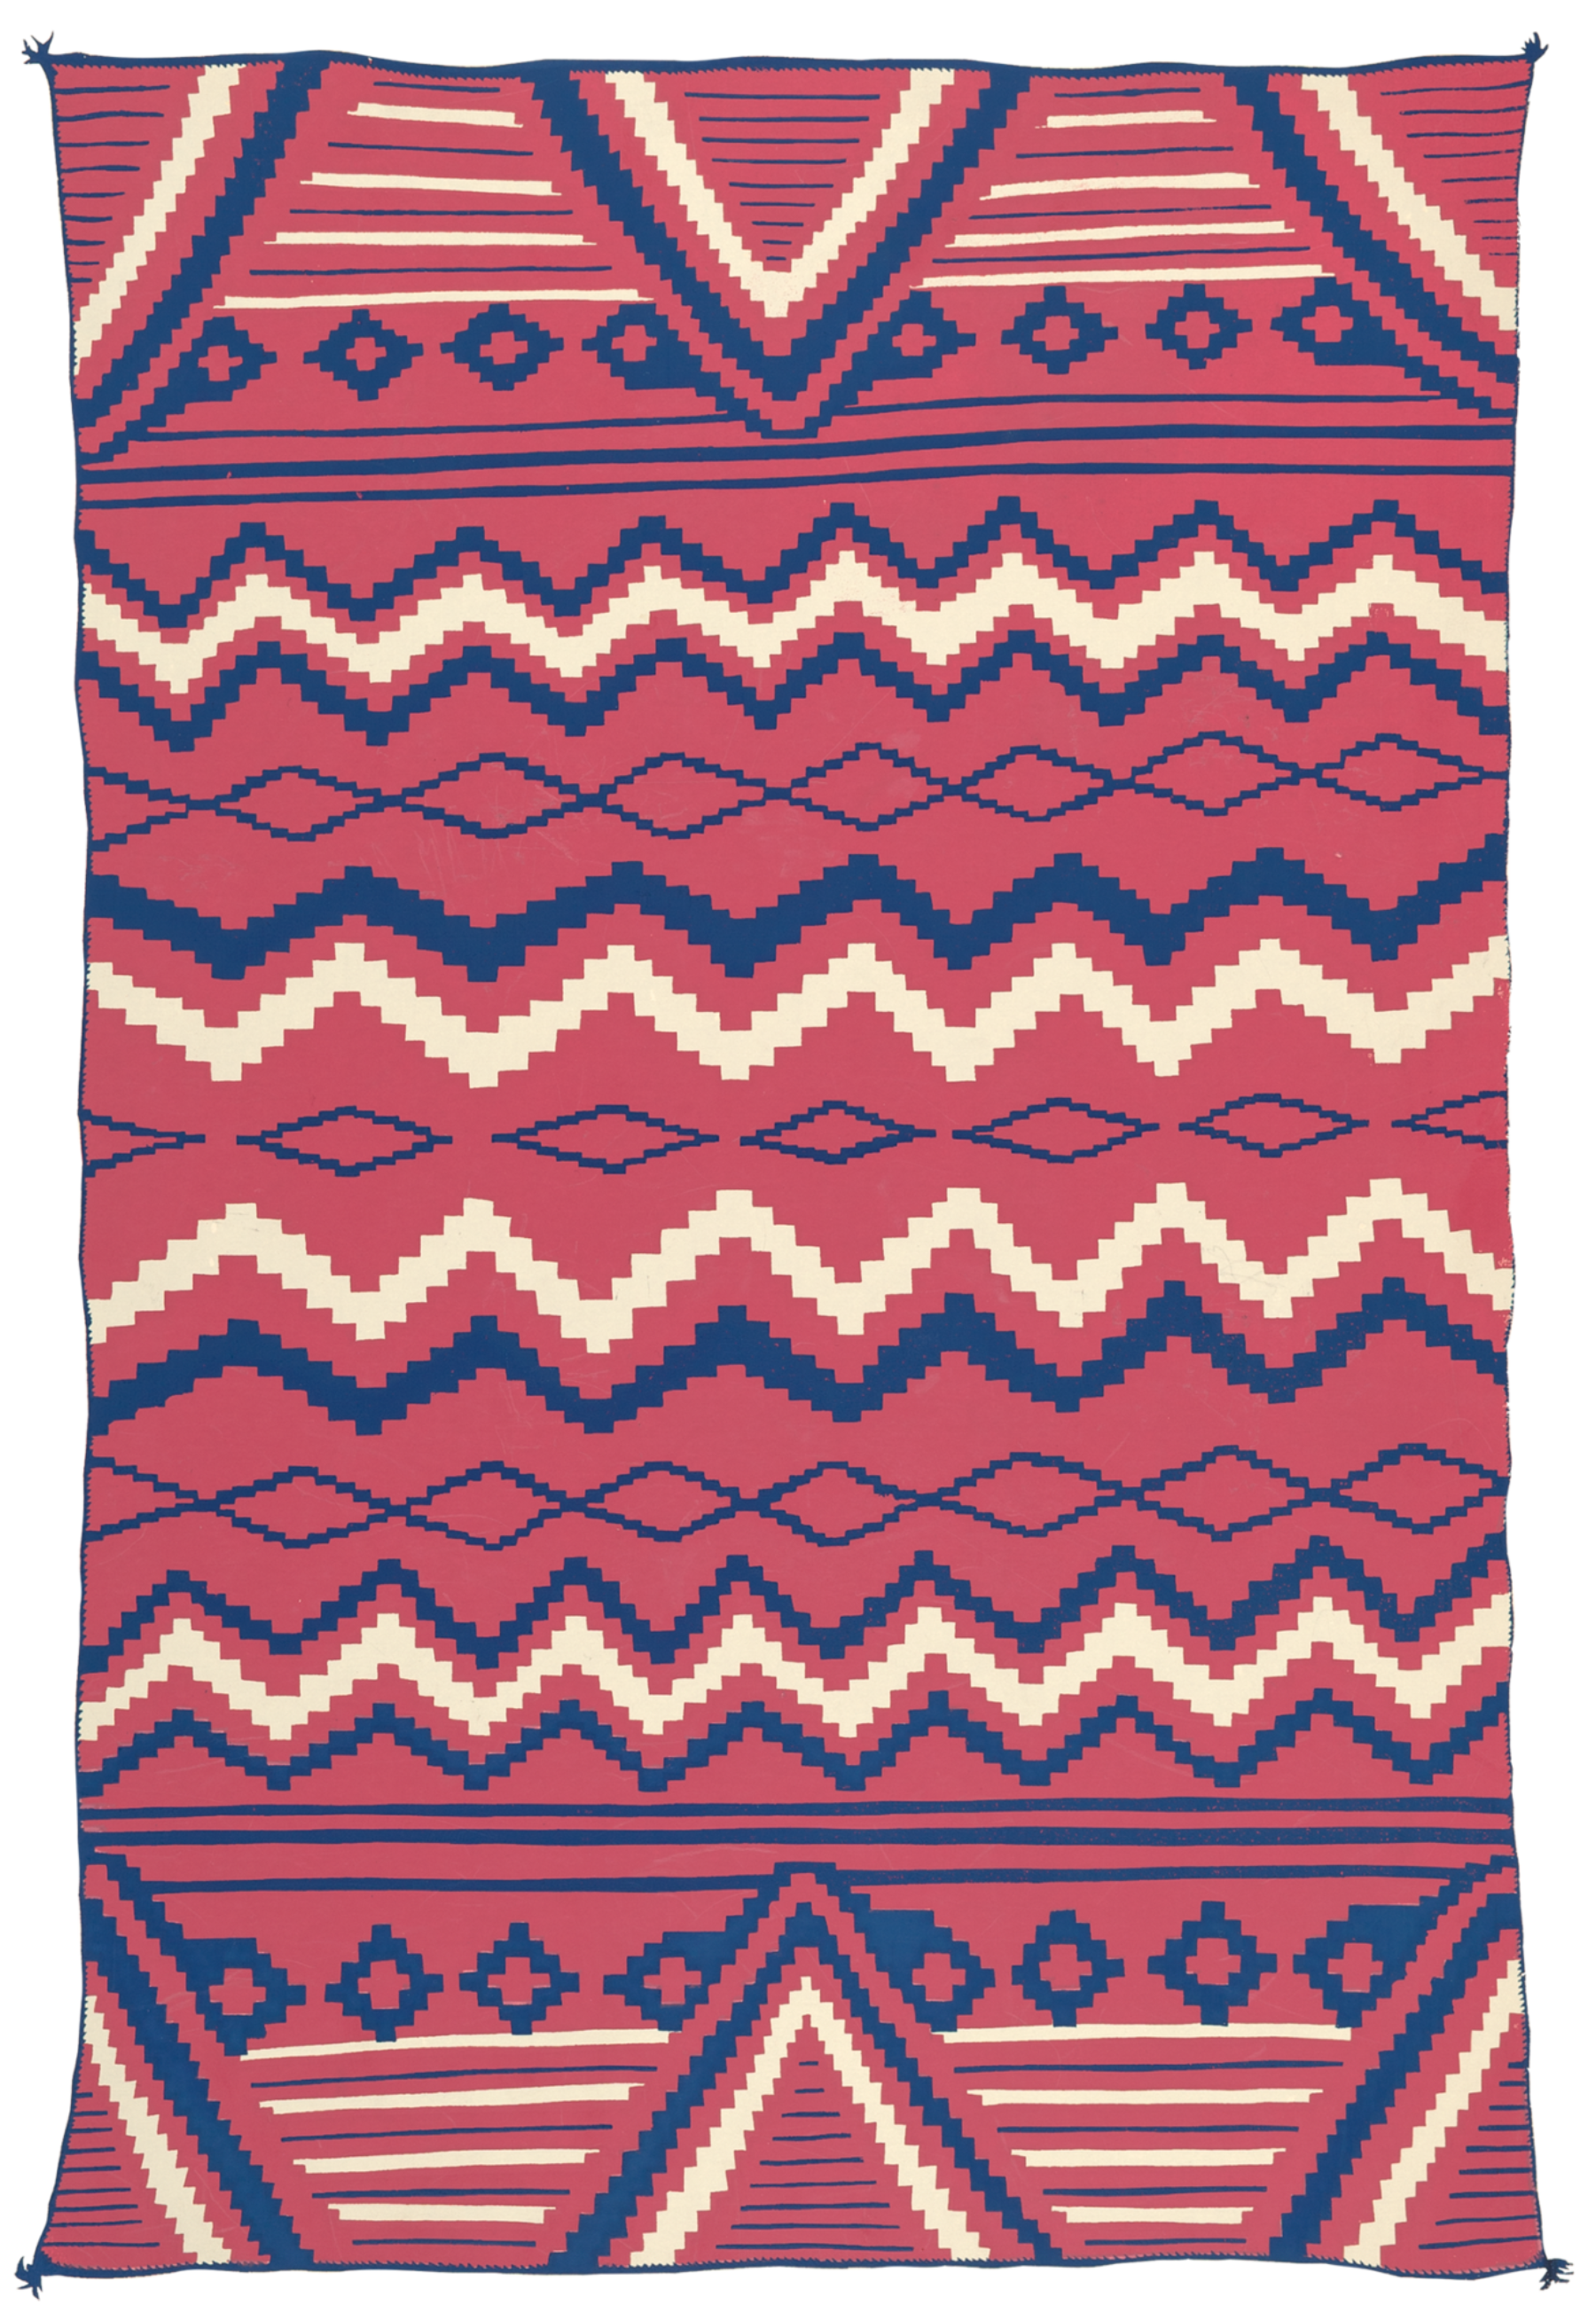 Louie Ewing, Plate 1 (Navajo Blankets), 1940–43. Screenprint, 26 x 20 inches (66.1 x 50.7 cm). National Gallery of Art, Washington, Reba and Dave Williams Collection, Gift of Reba and Dave Williams, 2008.